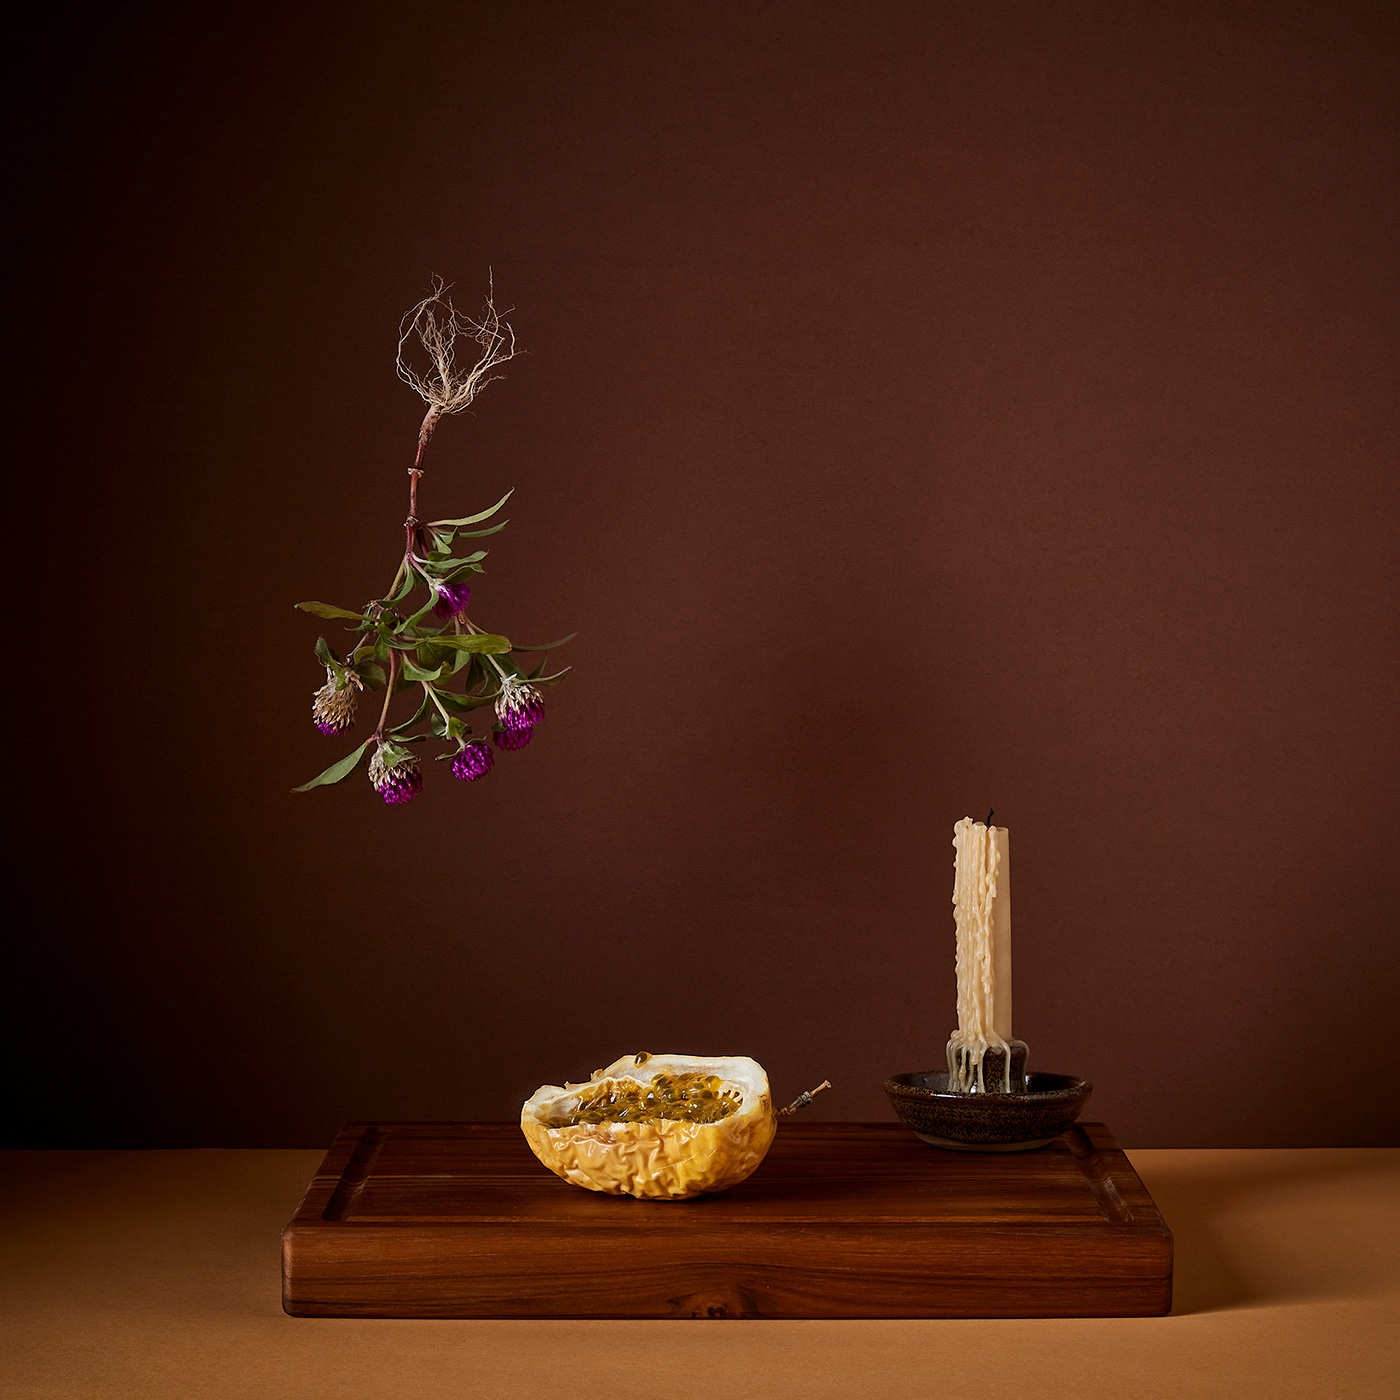 Board cuisine Food  KITCHENWARE still life Tropical wood wood board candle food photography